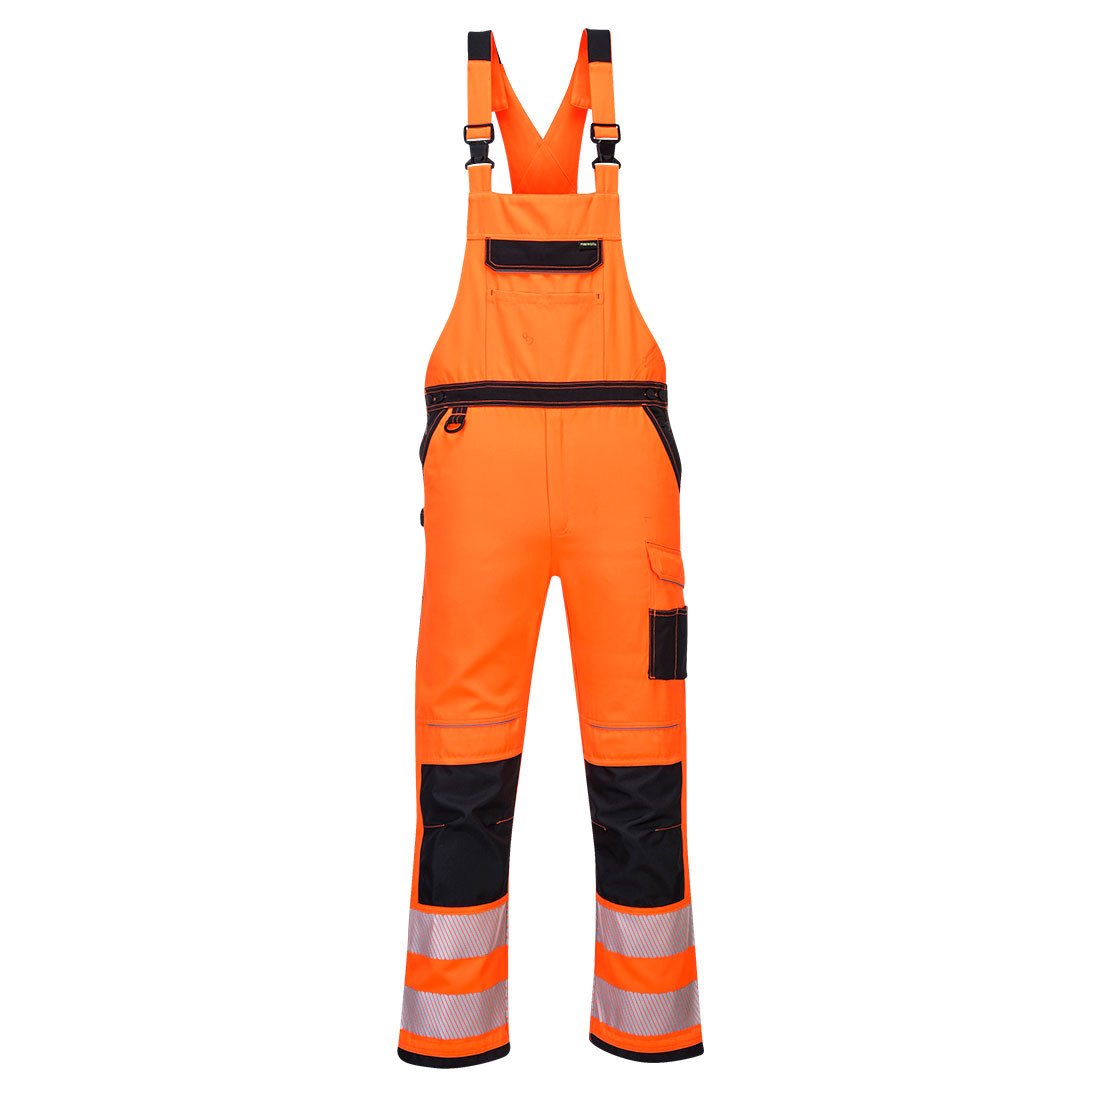 Bib & Brace Overalls Guide | Low Price Guarantee and Free Delivery